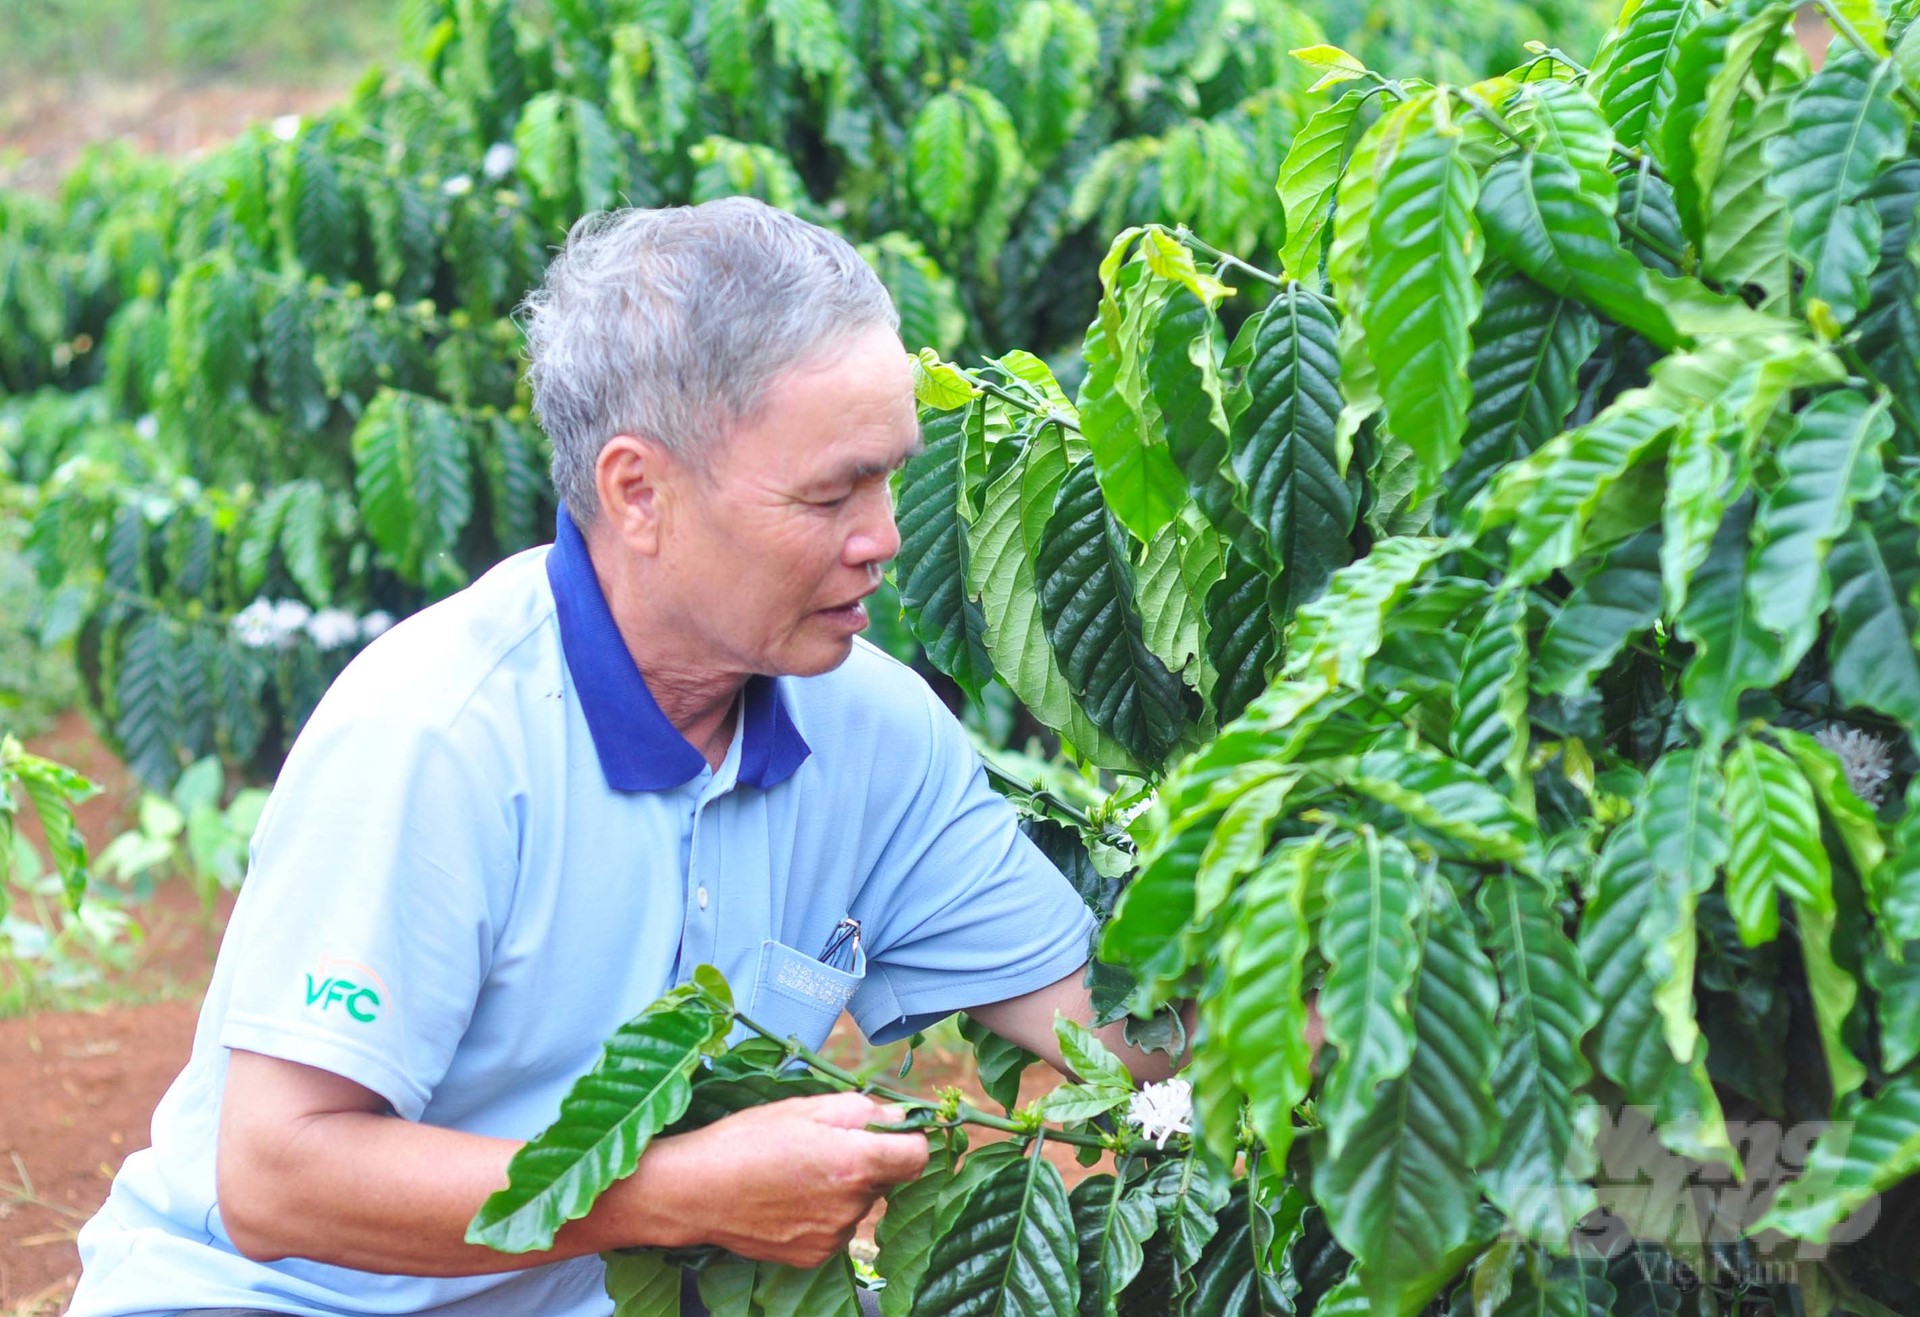 Lam Dong currently has about 176,000 ha of coffee, of which Robusta coffee accounts for over 160,000 ha. Photo: Minh Hau.